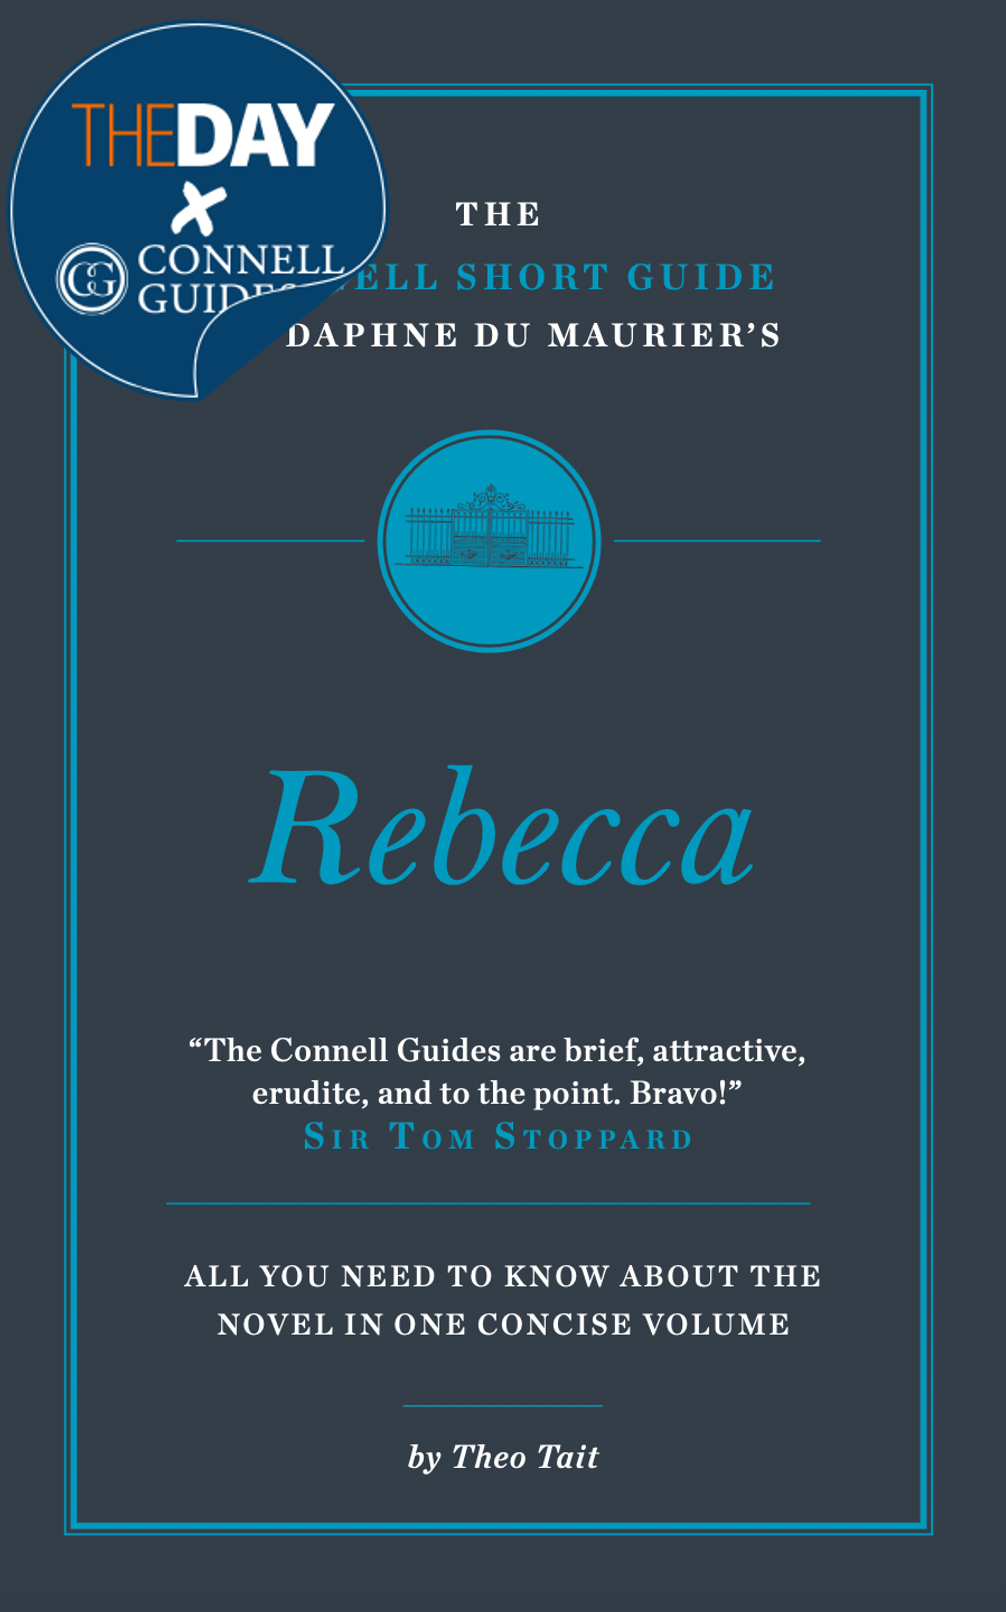 The Day x Connell Guides - The Connell Short Guide to Daphne Du Maurier's Rebecca